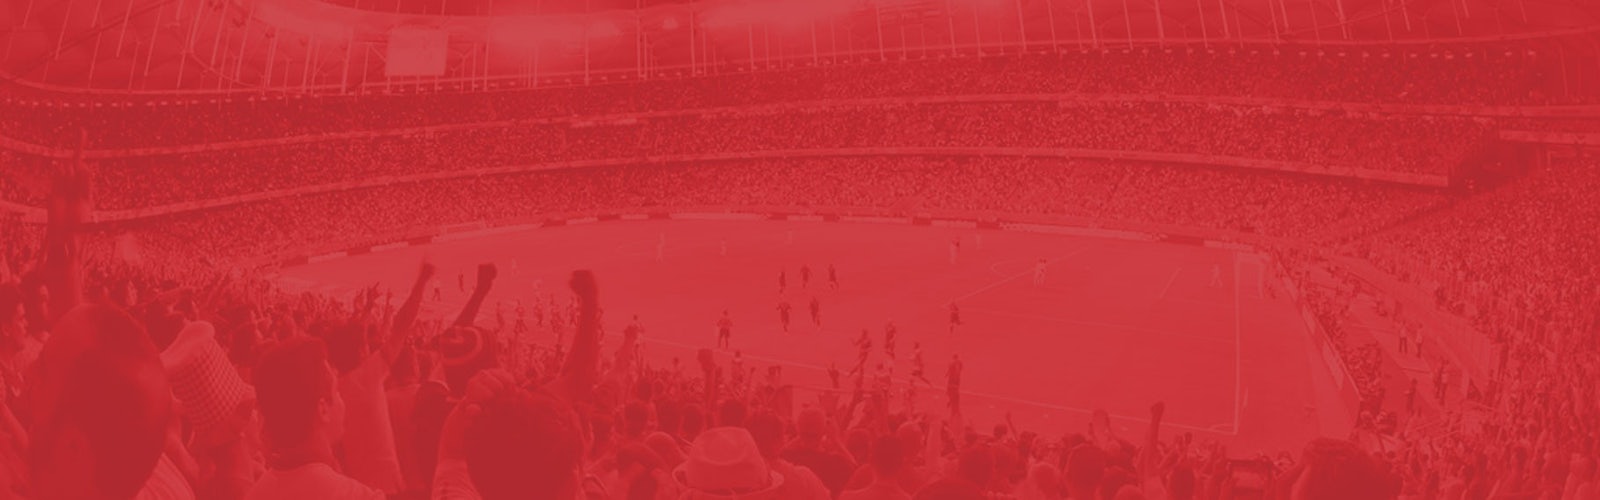 Header image footall arena